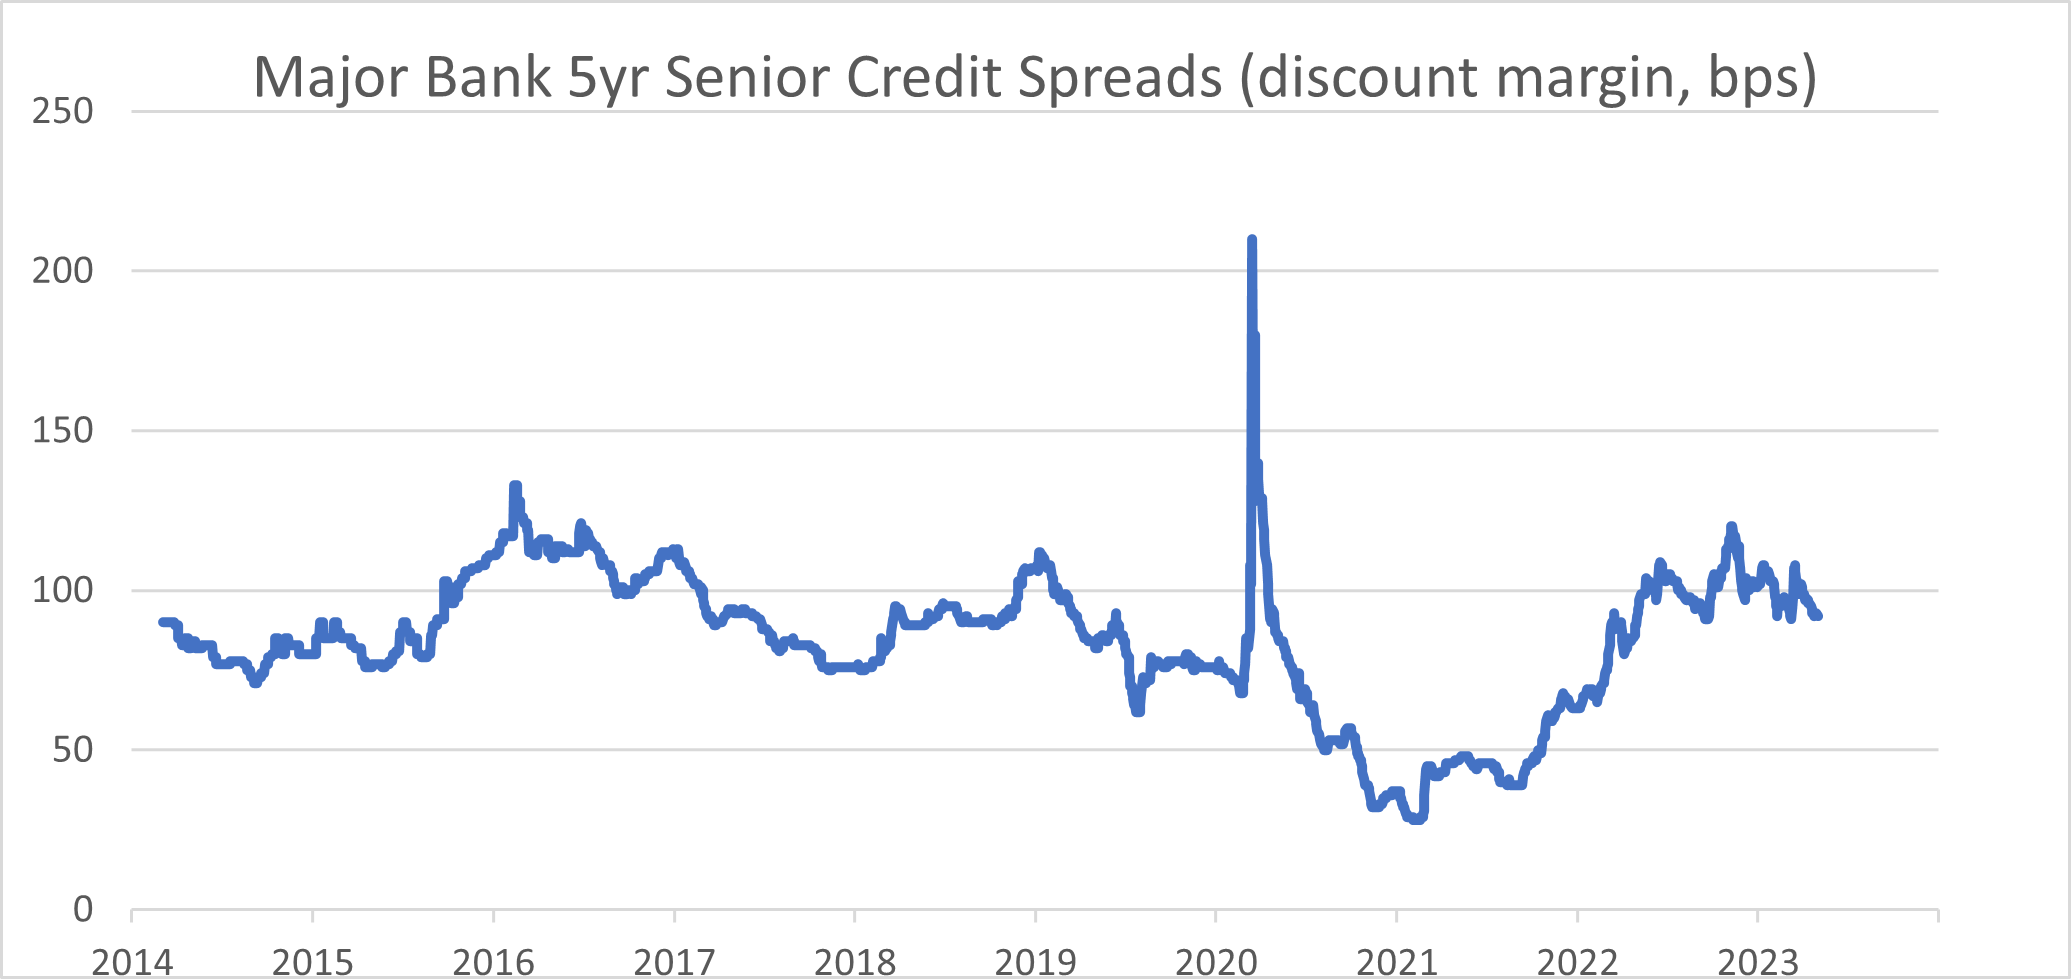 Source: Westpac, Betashares. Data as at 1 May 2023. Past spreads are not indicative of future spreads. 